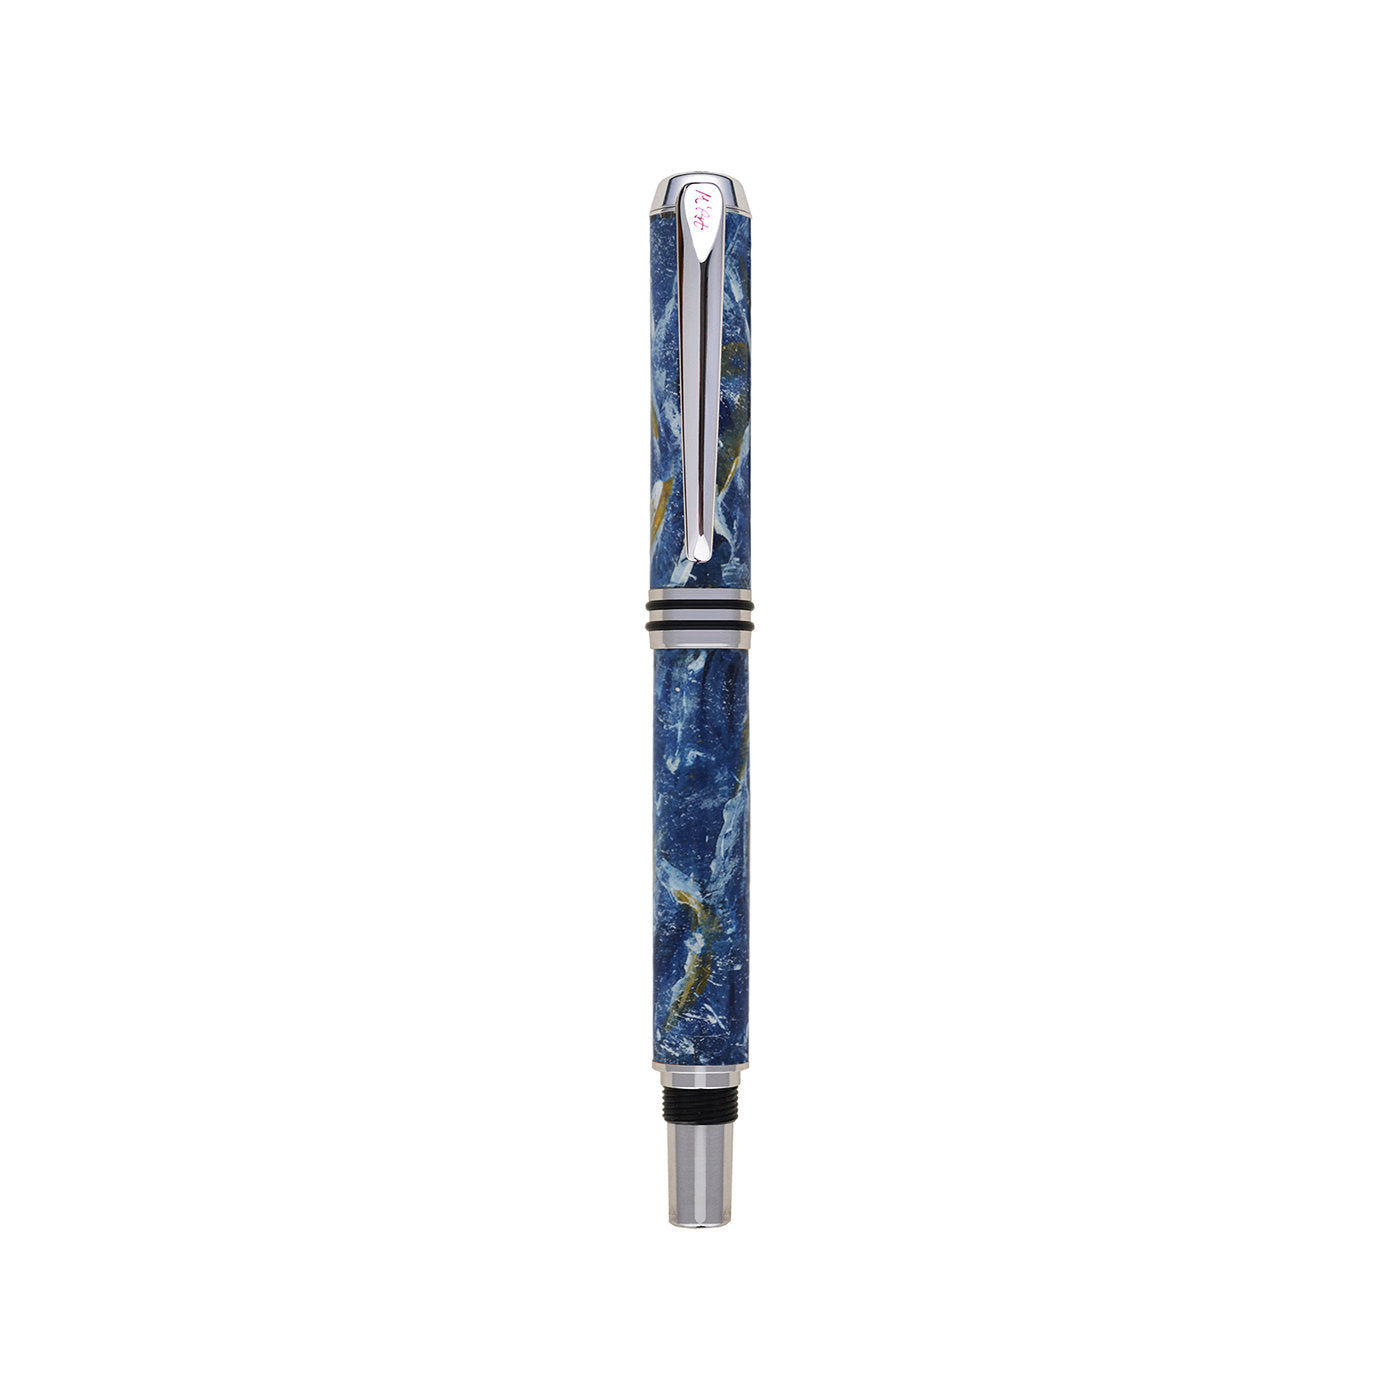 Antea Marbled Blue Fountain Pen in Olive Wood - Alternative view 1